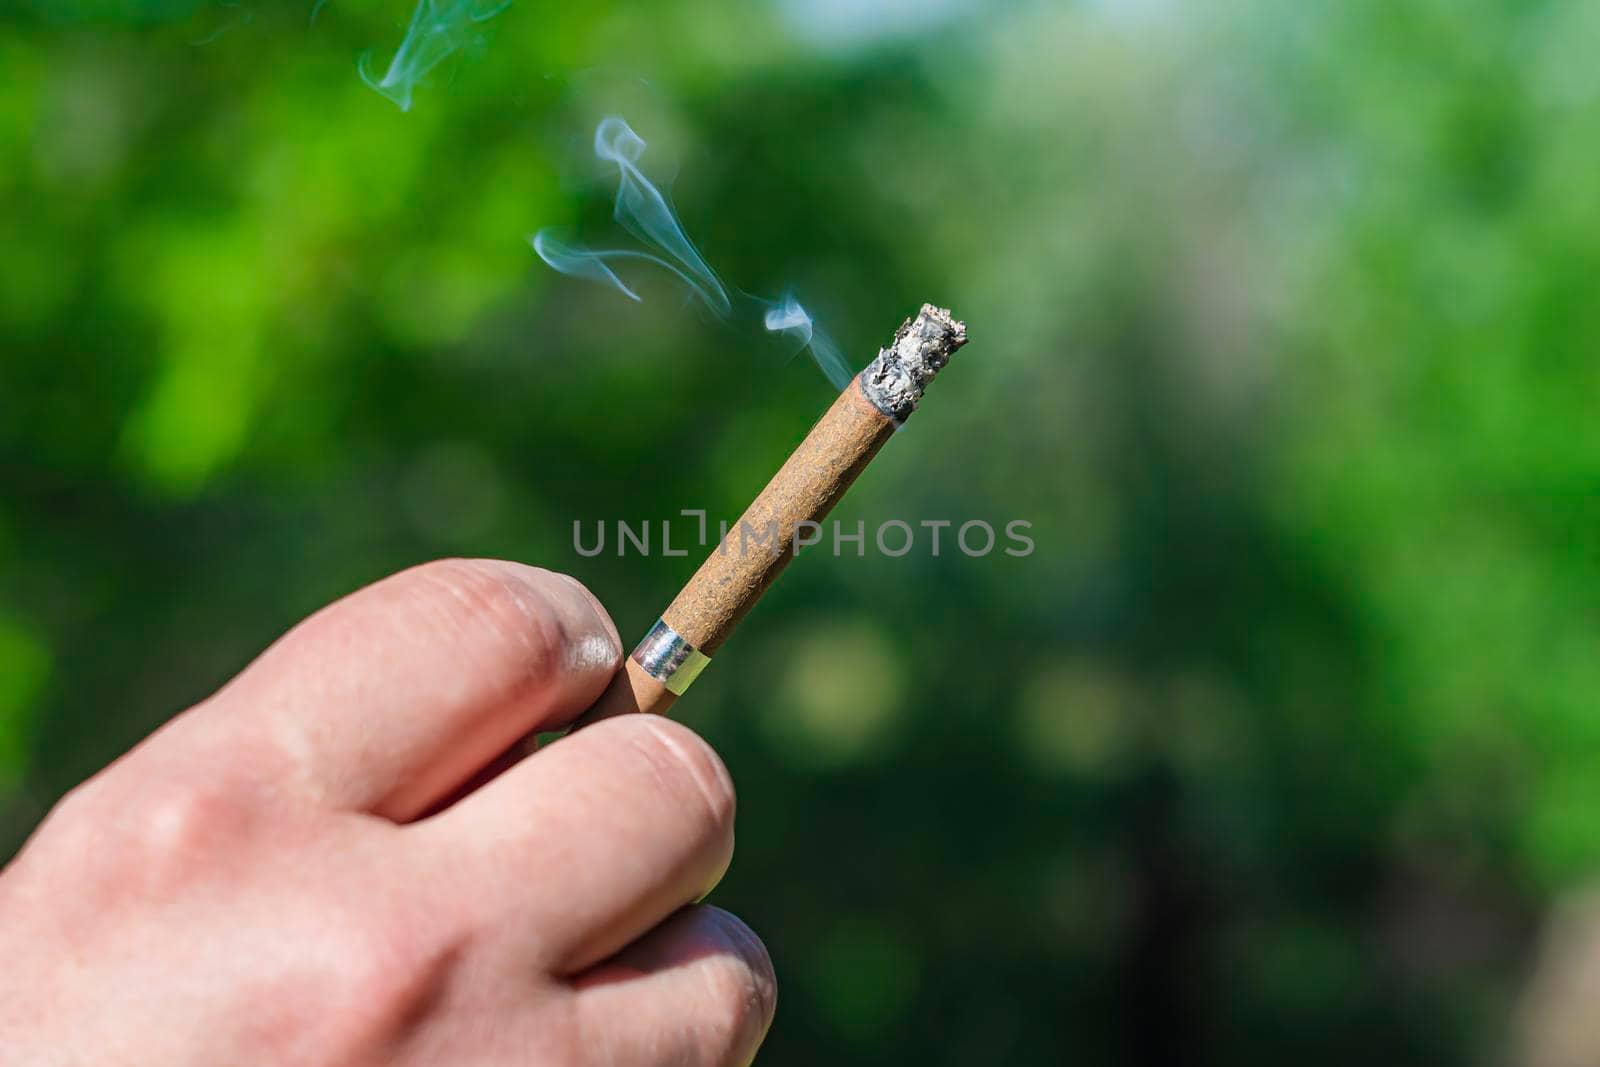 An expensive premium cigarette in the hands of a smoker close-up against a background of greenery